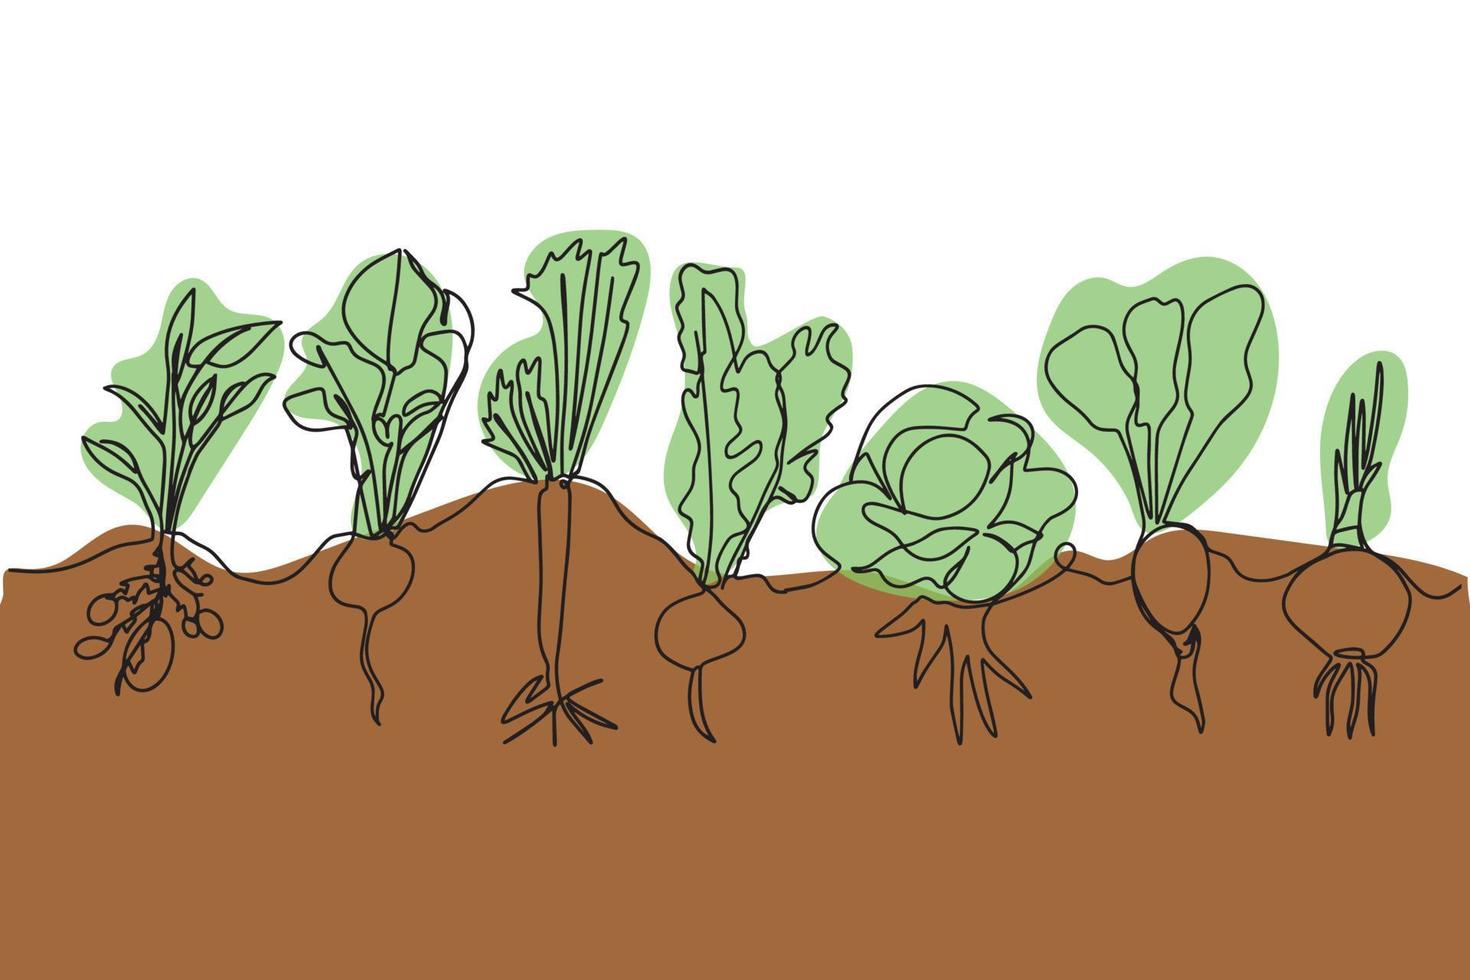 One line vector set of ripe vegetables, a sketch of a family of plants growing in the ground.